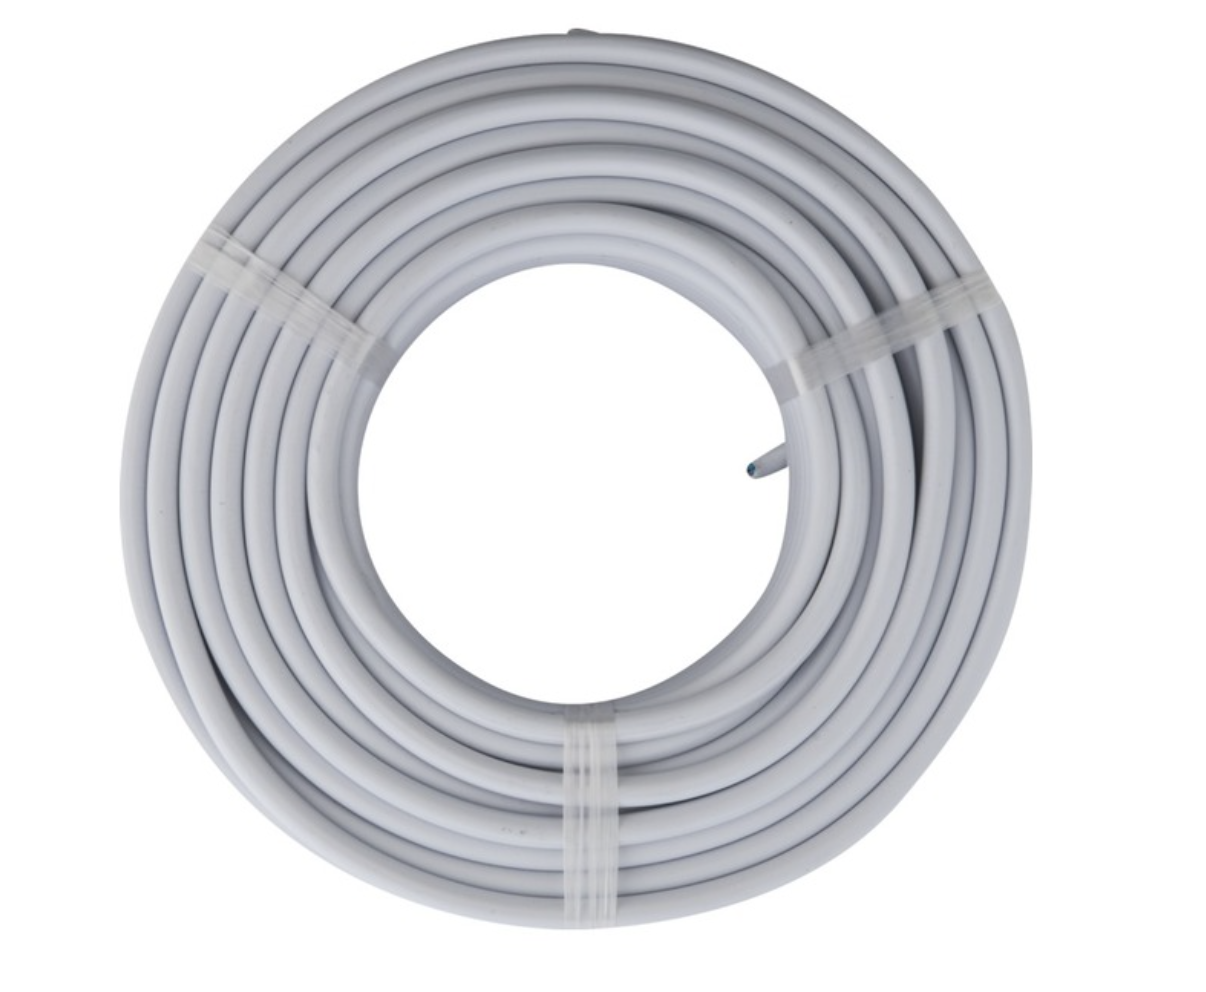 APDS325WE30 Surfix 2 Core and Earth Cable - White (30m)